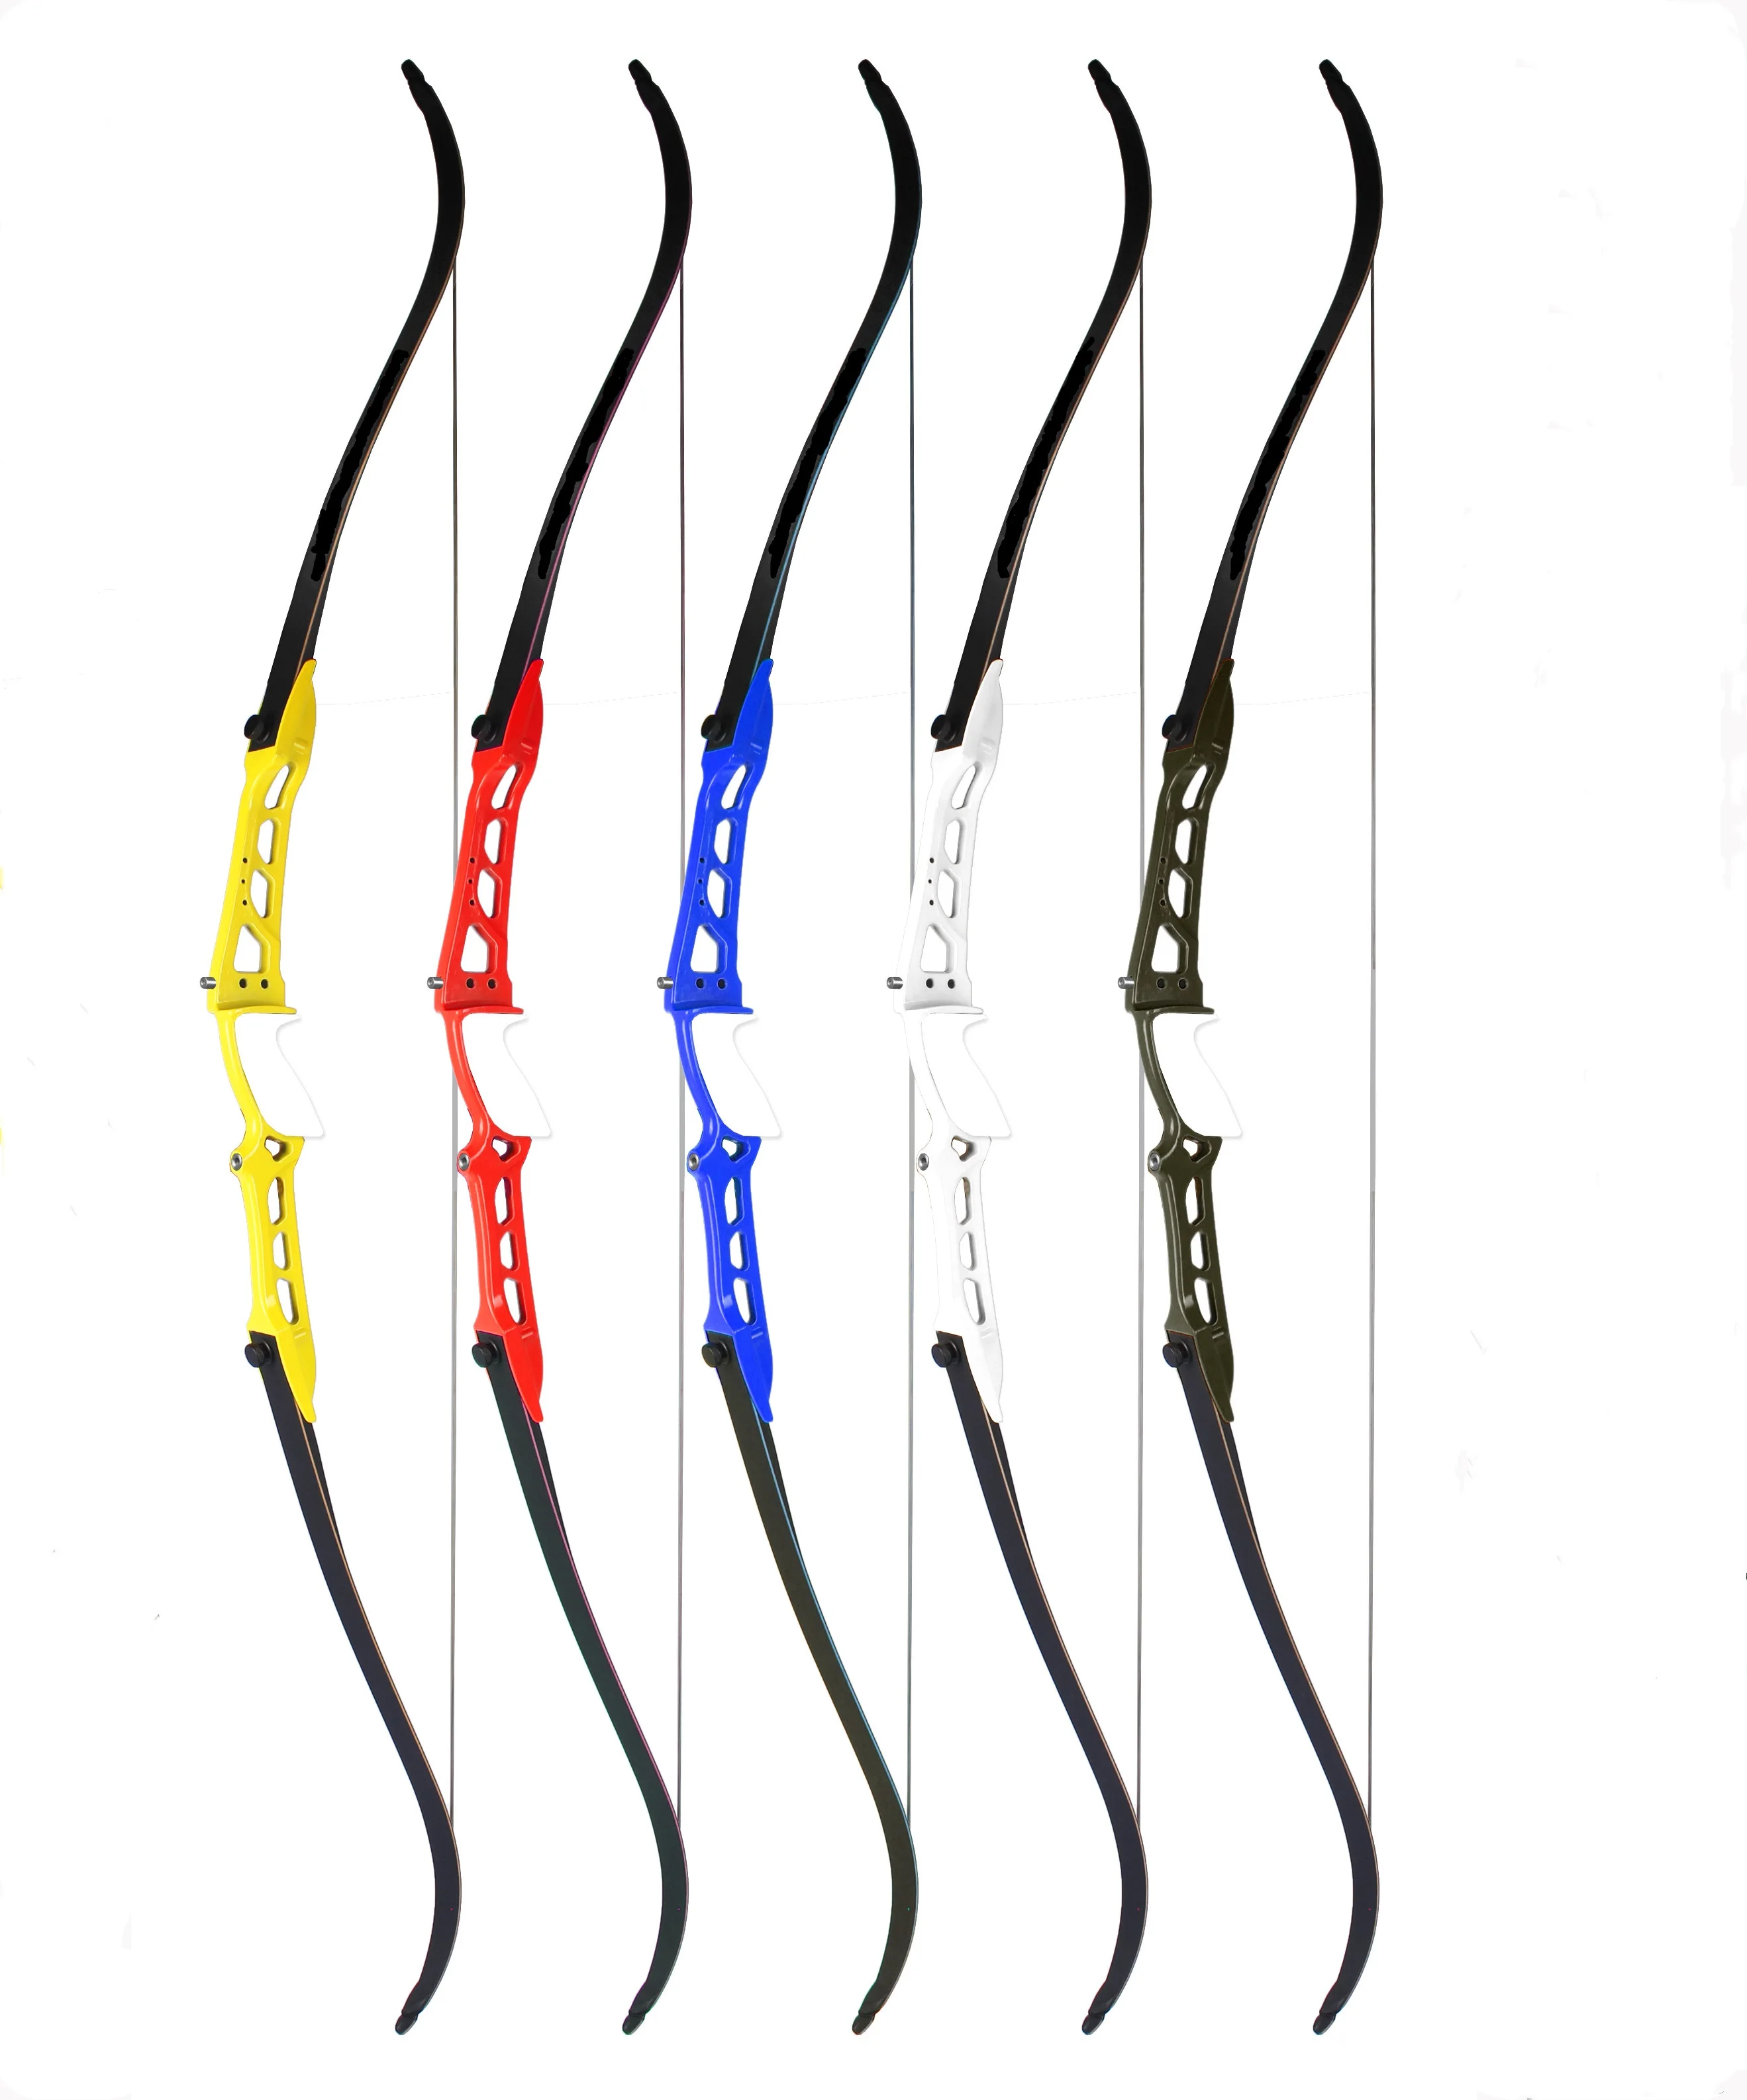 

ZS-F158 Hunting Fishing Competition takedown Recurve Bow for shooting Archery Arrow 18-40lbs Aluminum Riser Laminated Limbs